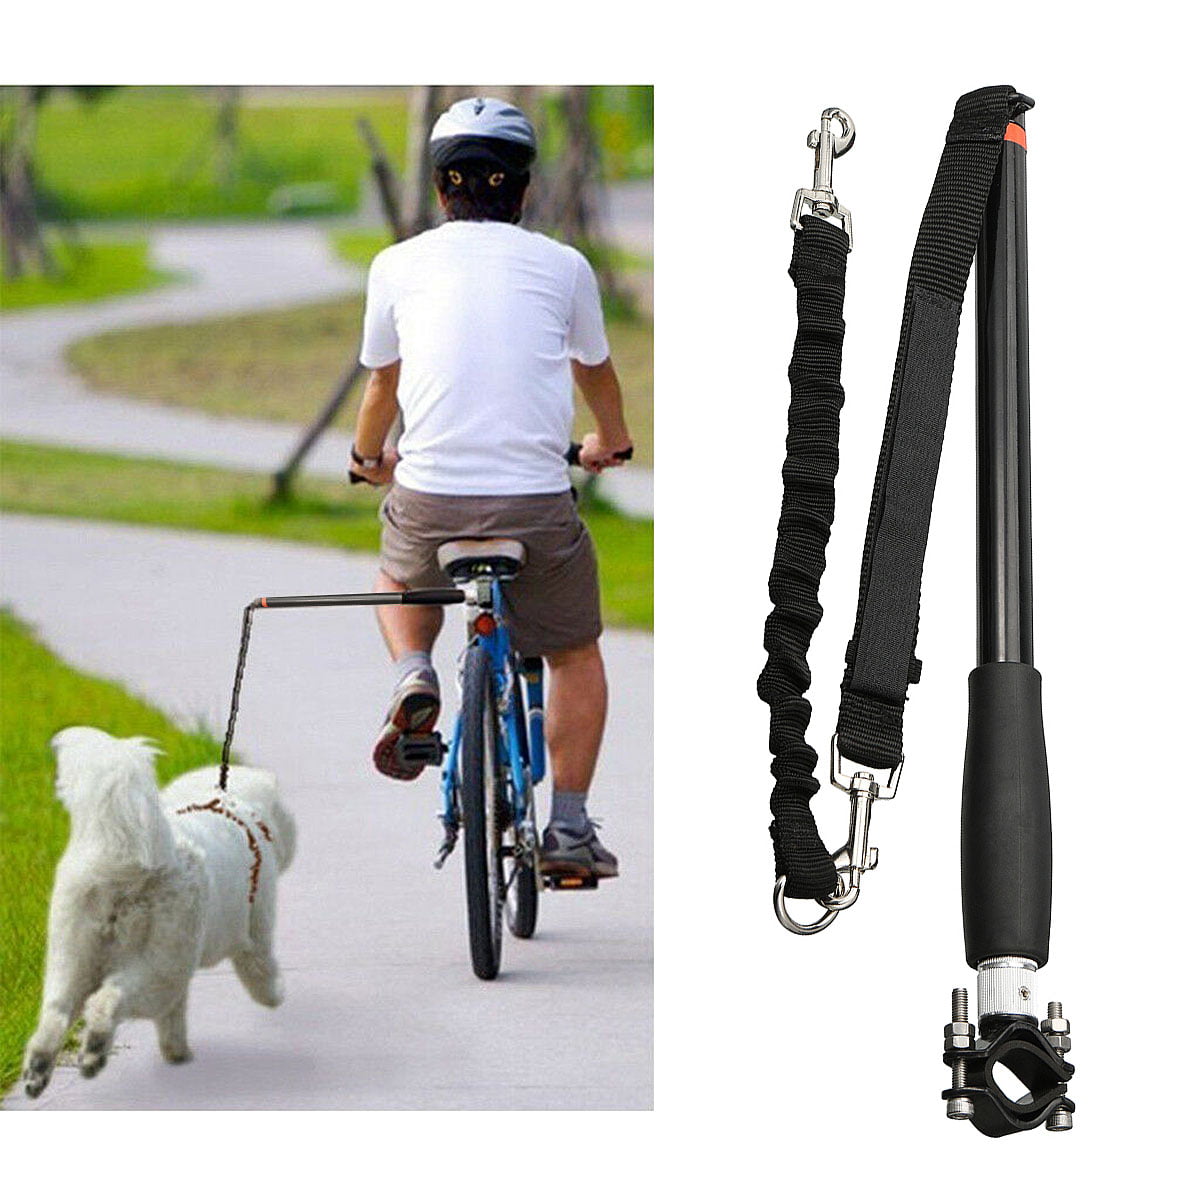 Dog Leash for Bike Riding Attachment Retractable Bicycle Exerciser for Medium Dog Dog Bike Leash Hands Free 